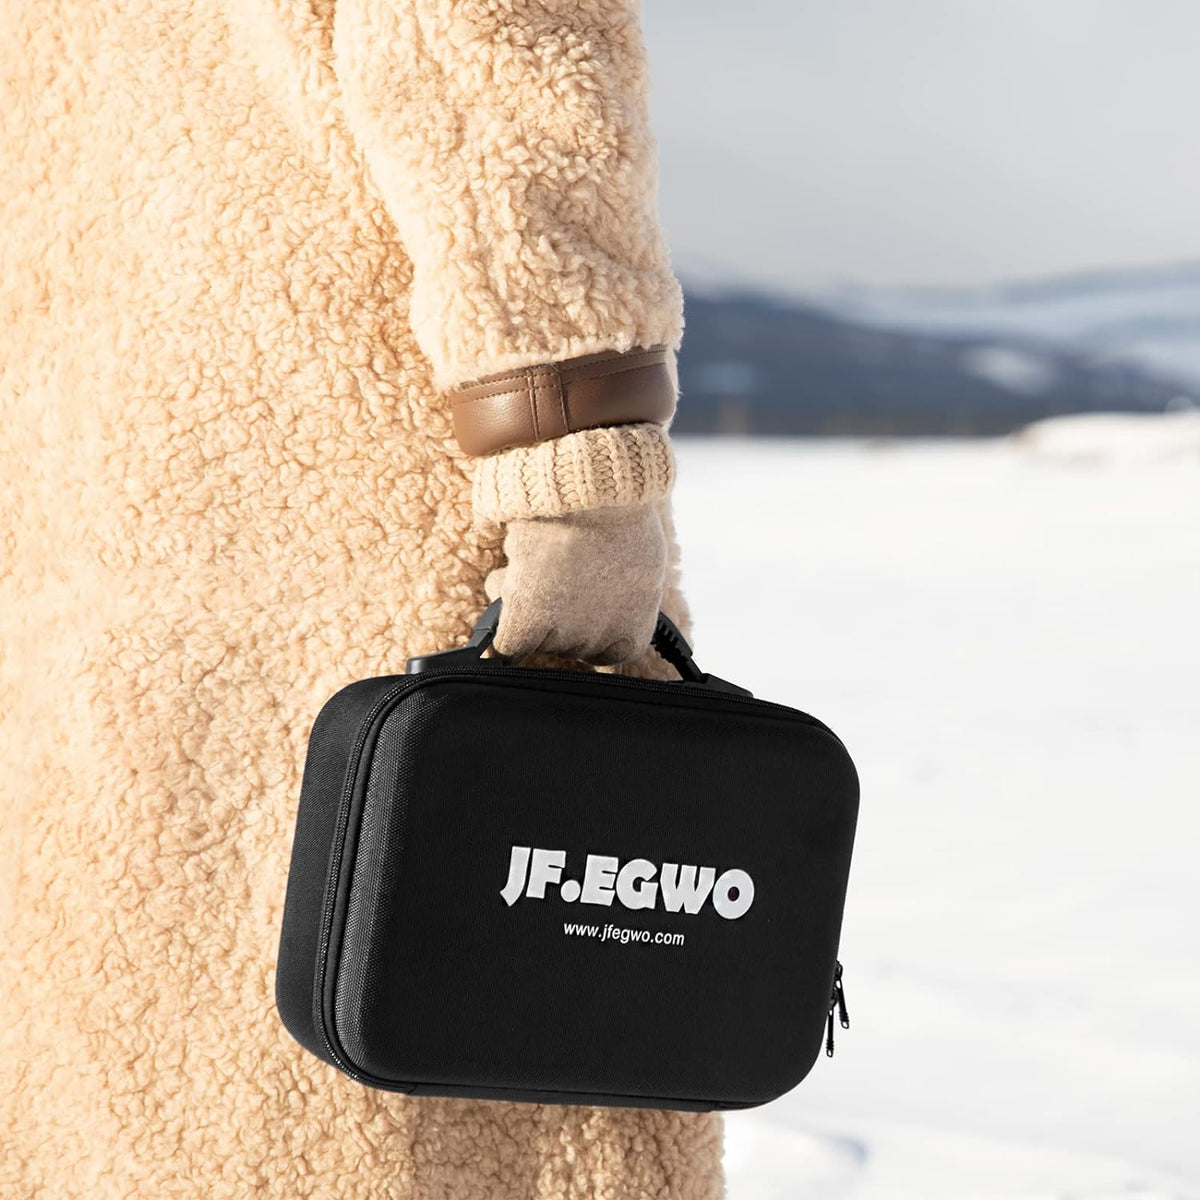 JFEGWO Portable Hard Storage Case Car Gadgets Carry Bag for 4000A and 6000A Lithium Jump Starters